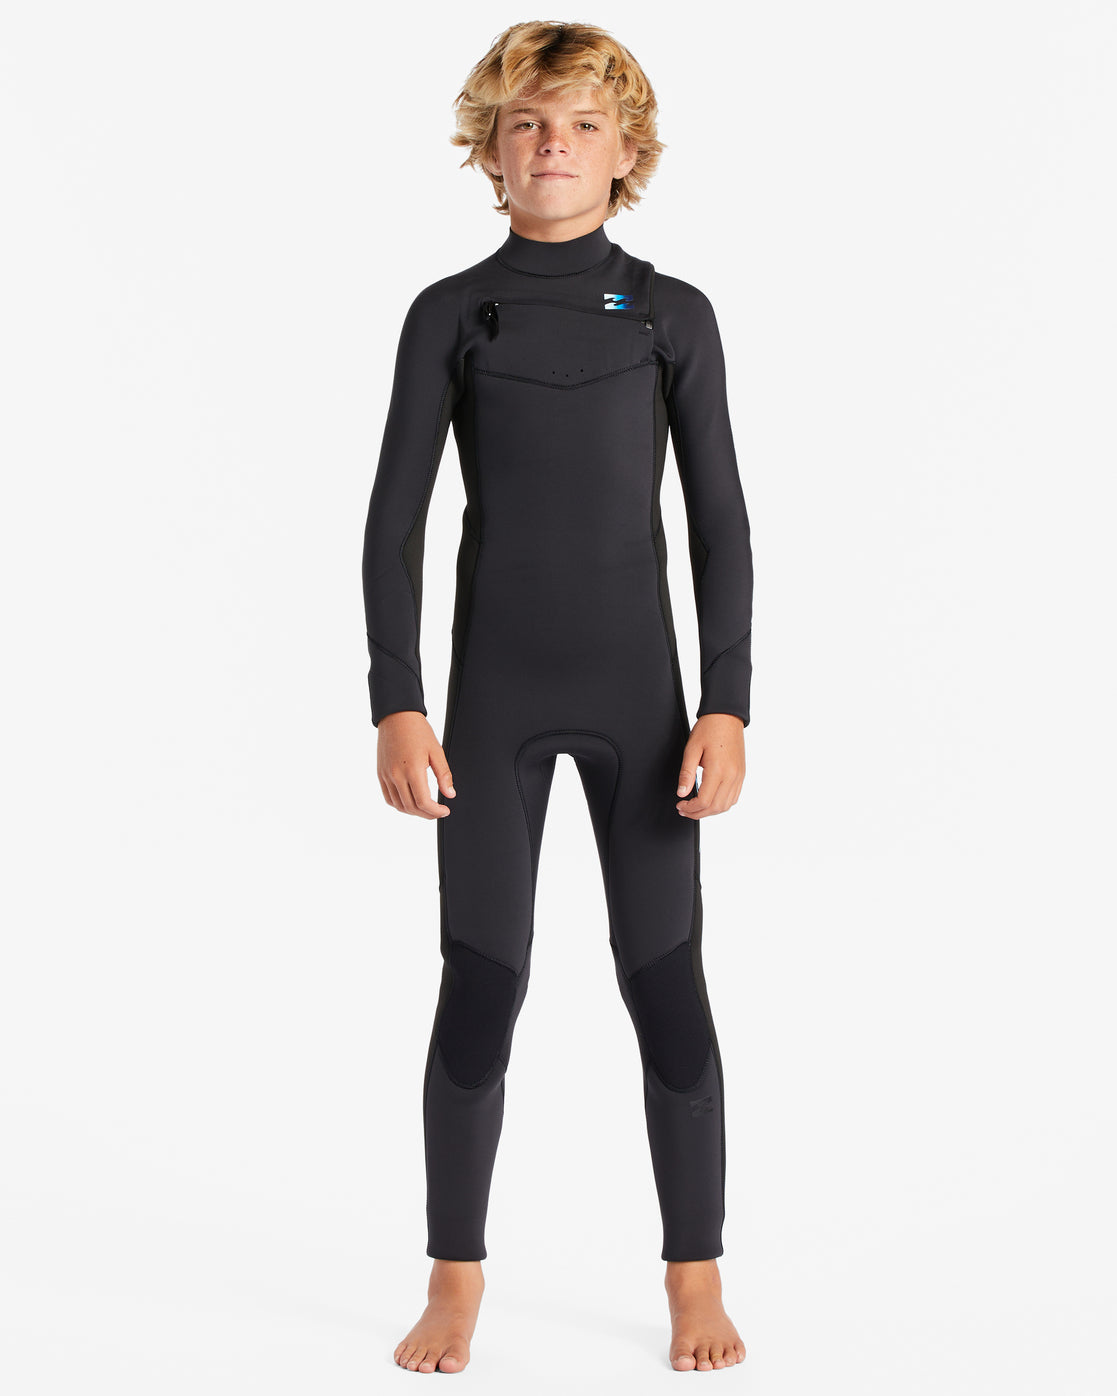 Billabong Youth Absolute 4/3mm Chest Zip Wetsuit in black with blue fade colourway on model